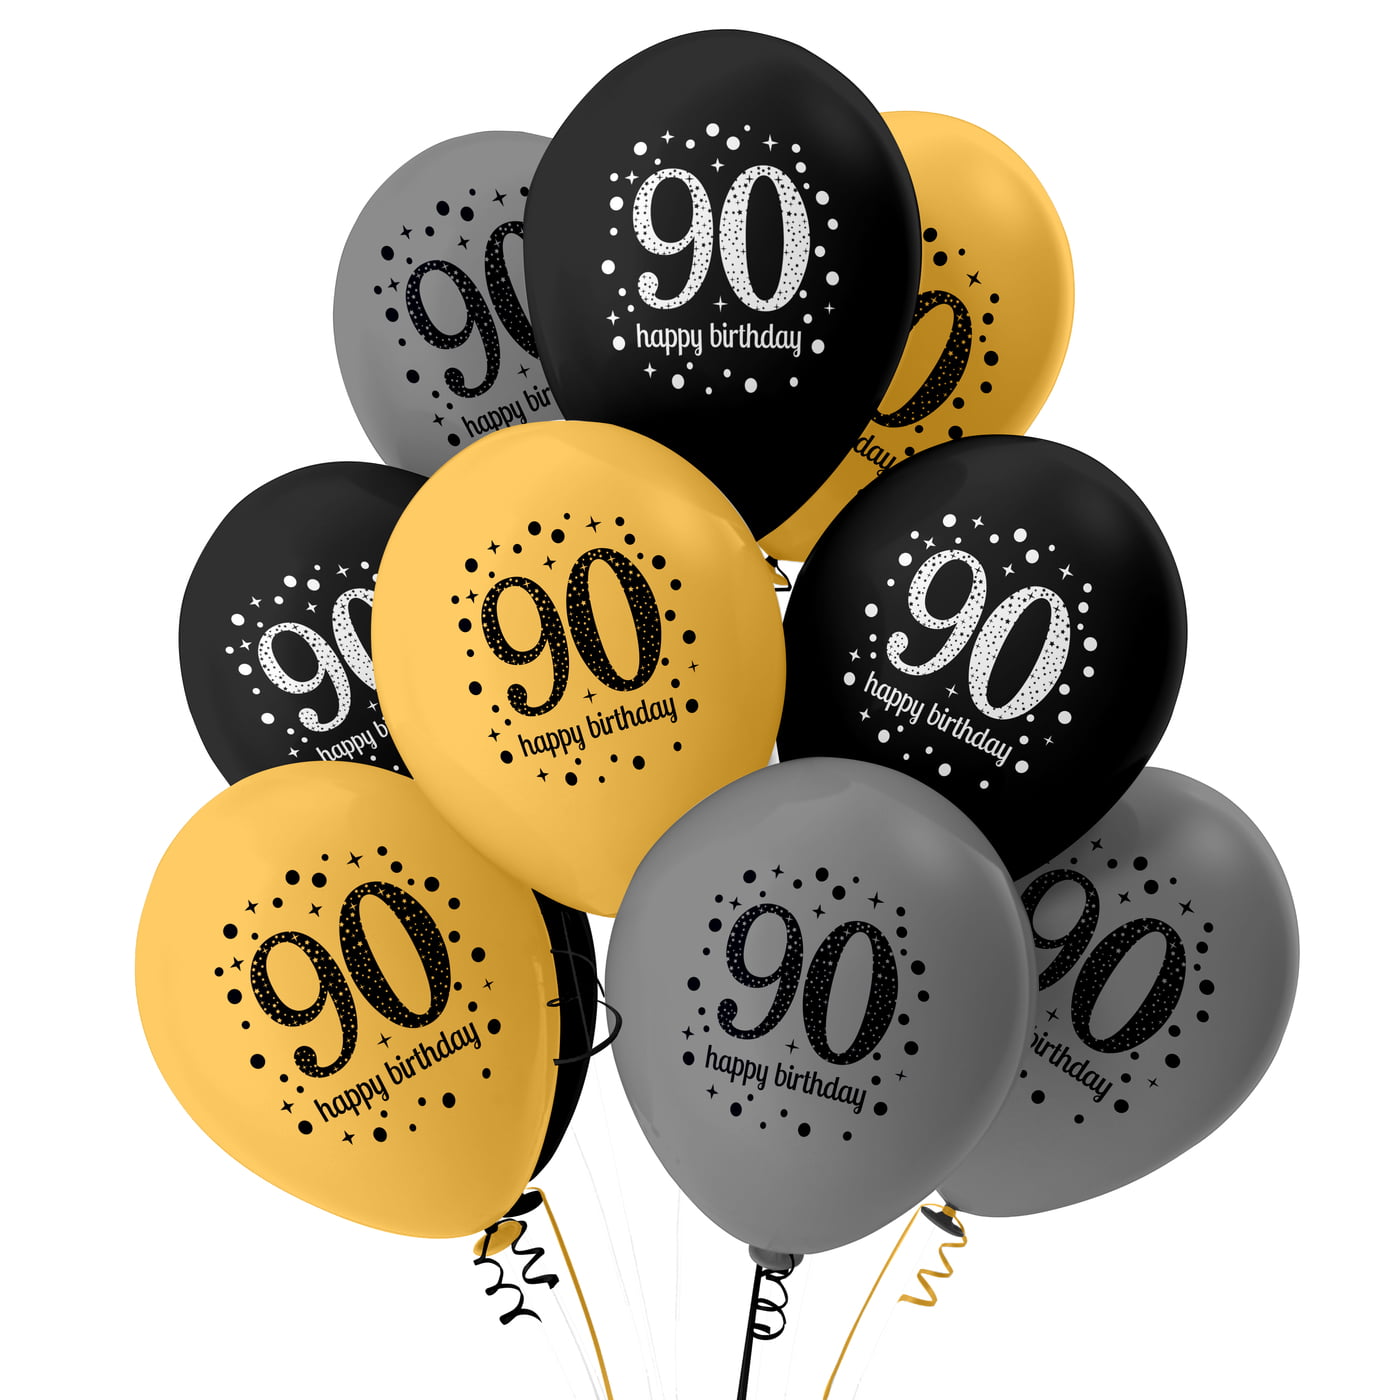 The Magic Balloons- Happy 90th Birthday Balloons for Men and women, 90 Birthday Balloons 90th Birthday Party Supplies Black Gold and Silver Birthday Decorations balloons party décor pack of 30 pcs